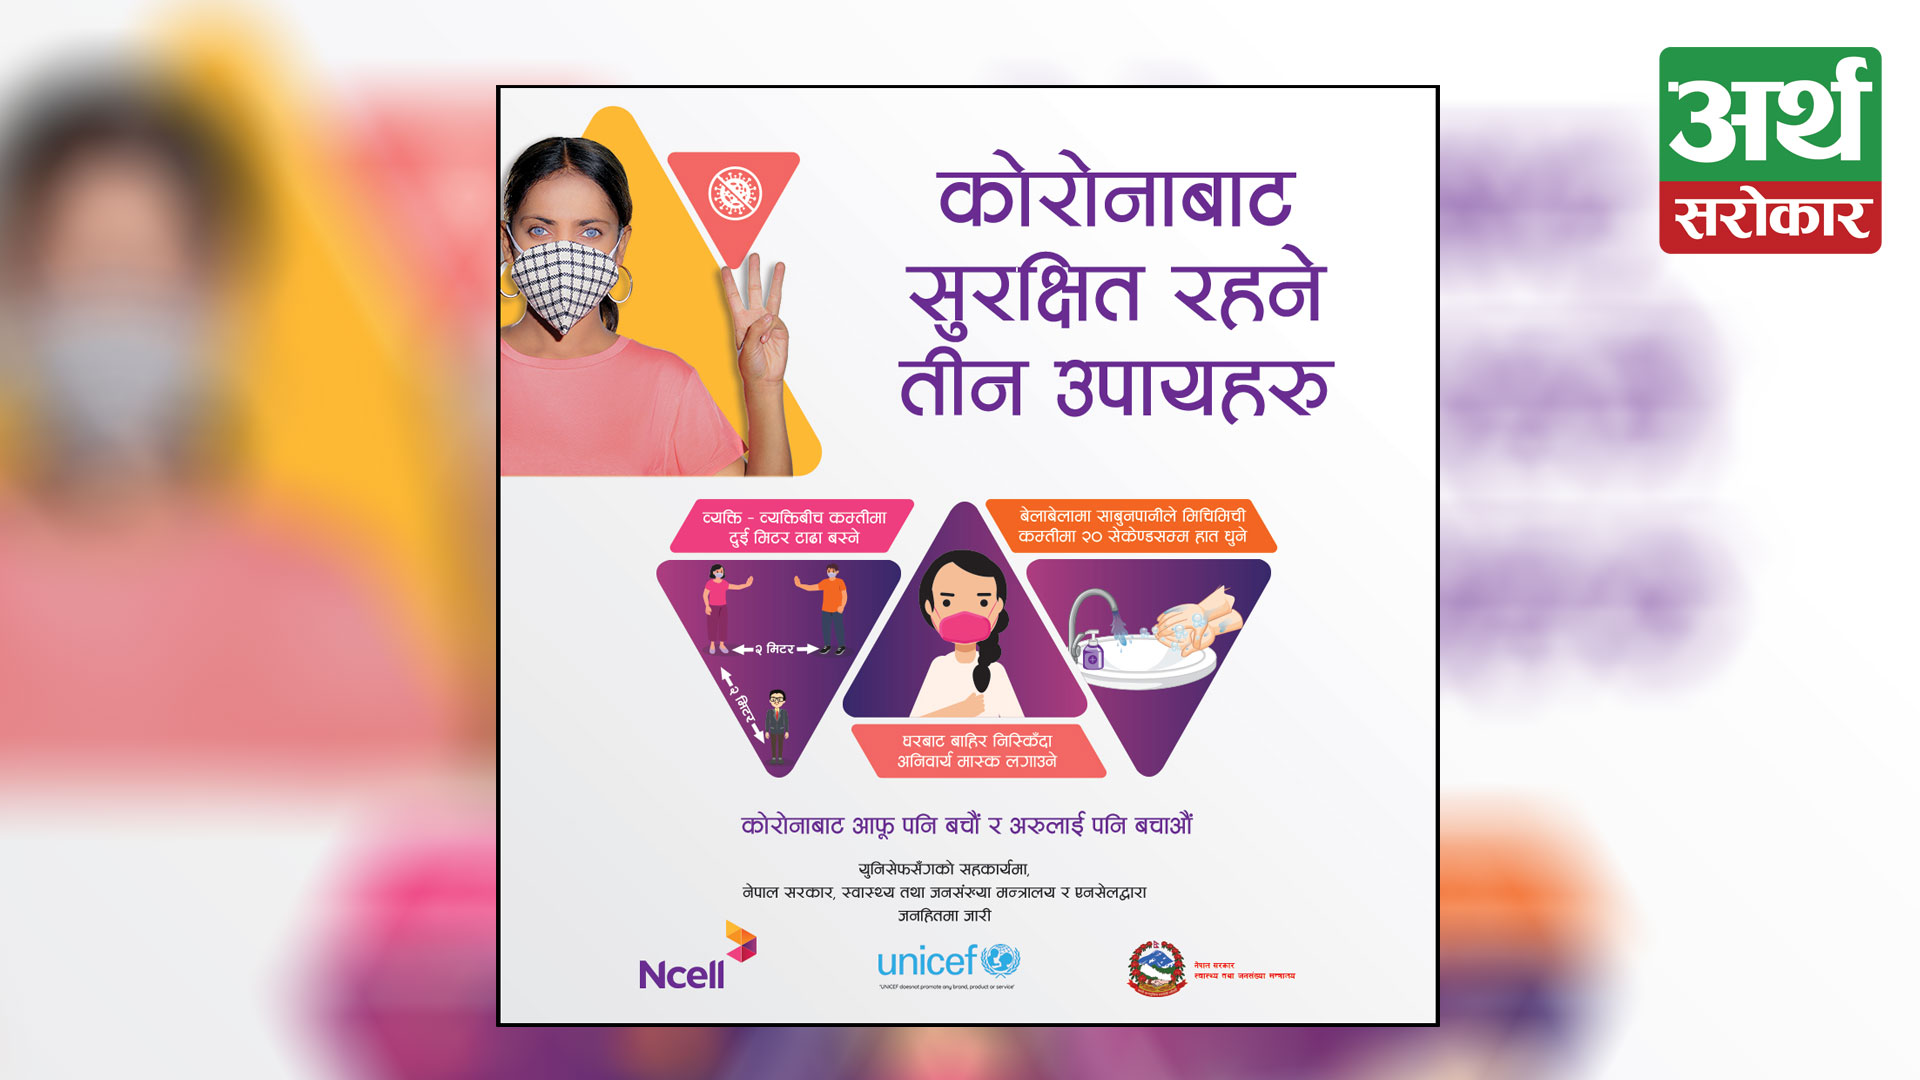 Ncell collaborates with Ministry of Health and Population and UNICEF to raise awareness on COVID